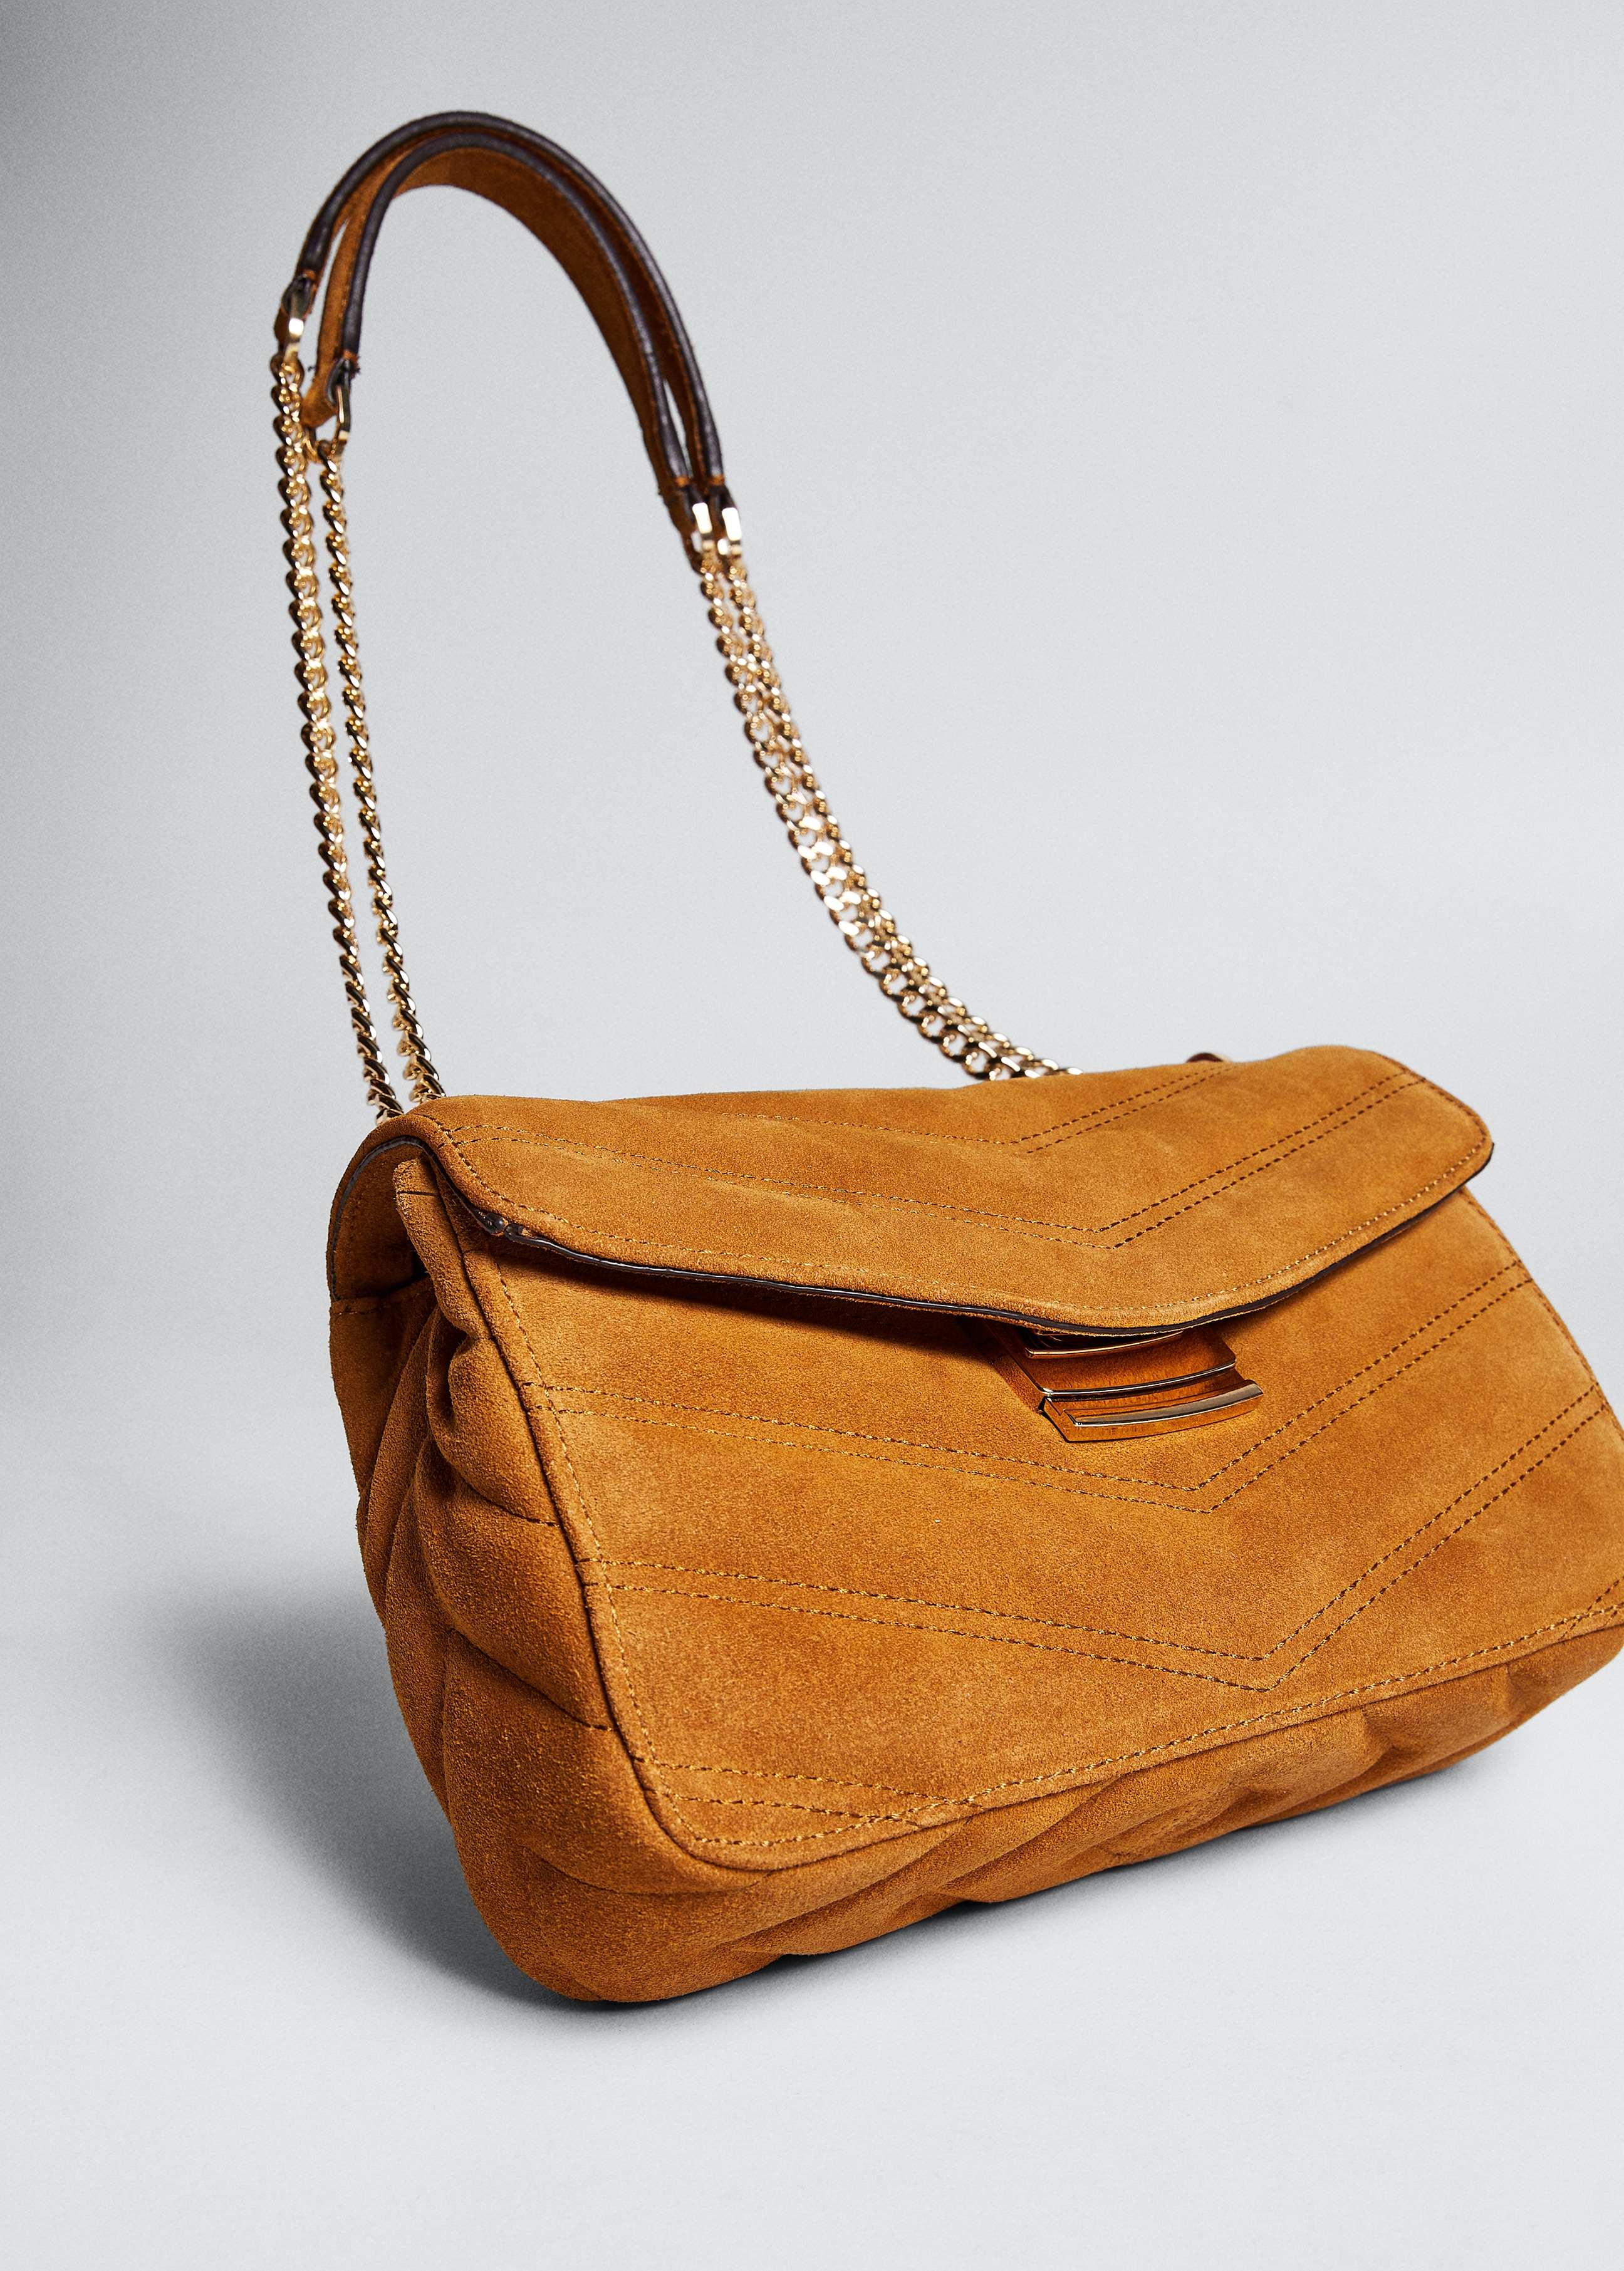 Chain leather bag - Details of the article 5